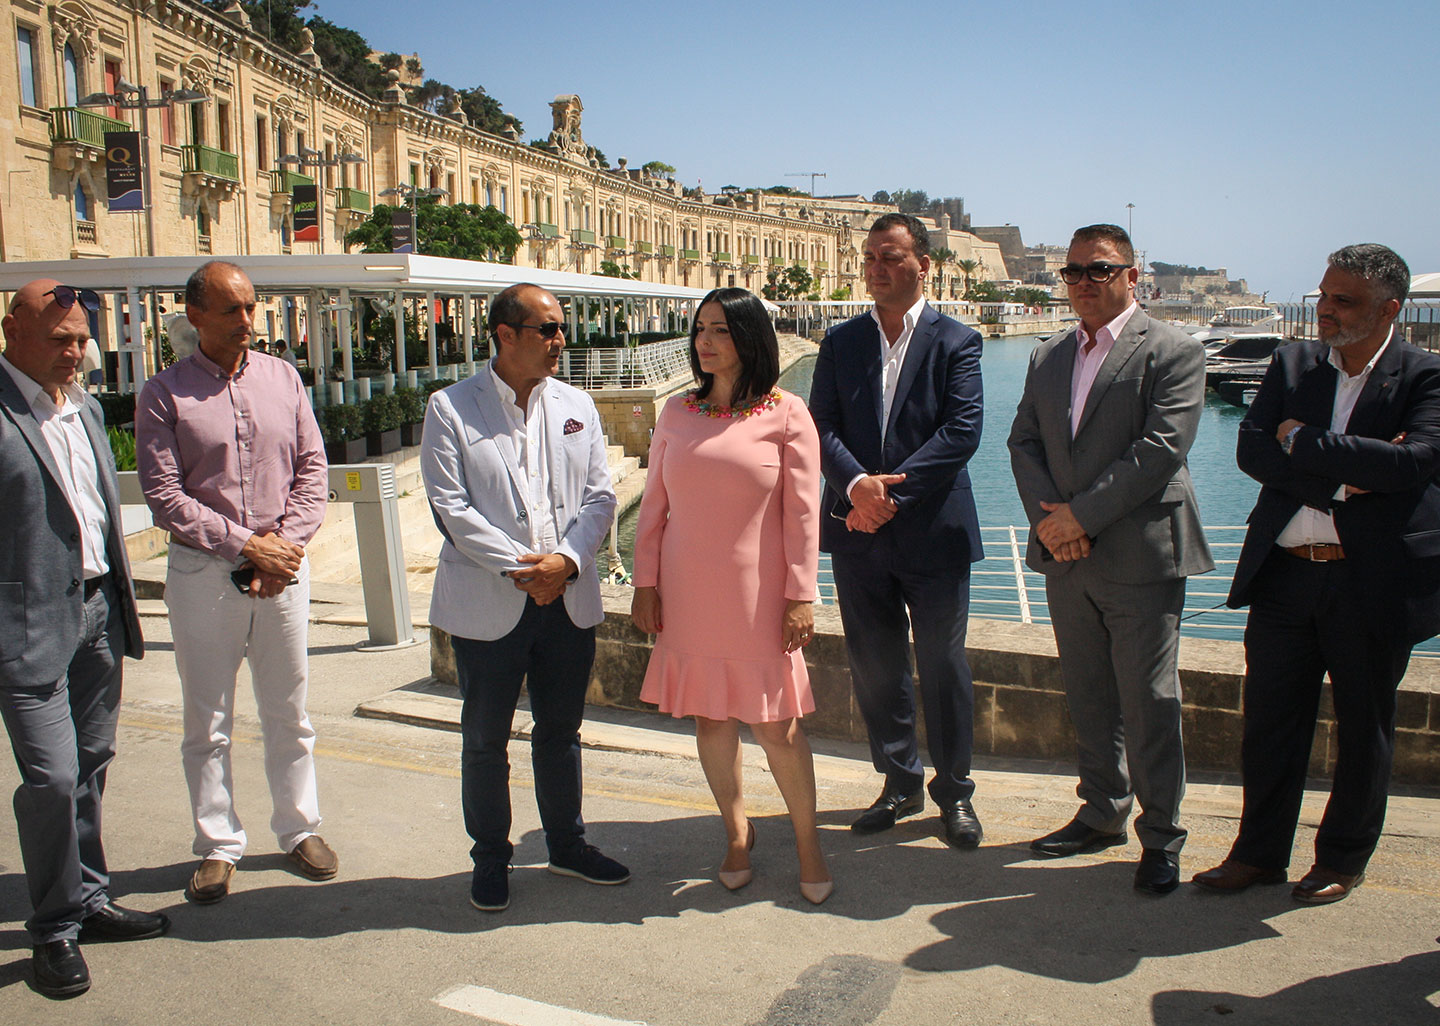 Over €2m invested in revamping the outdoor area at Valletta Waterfront